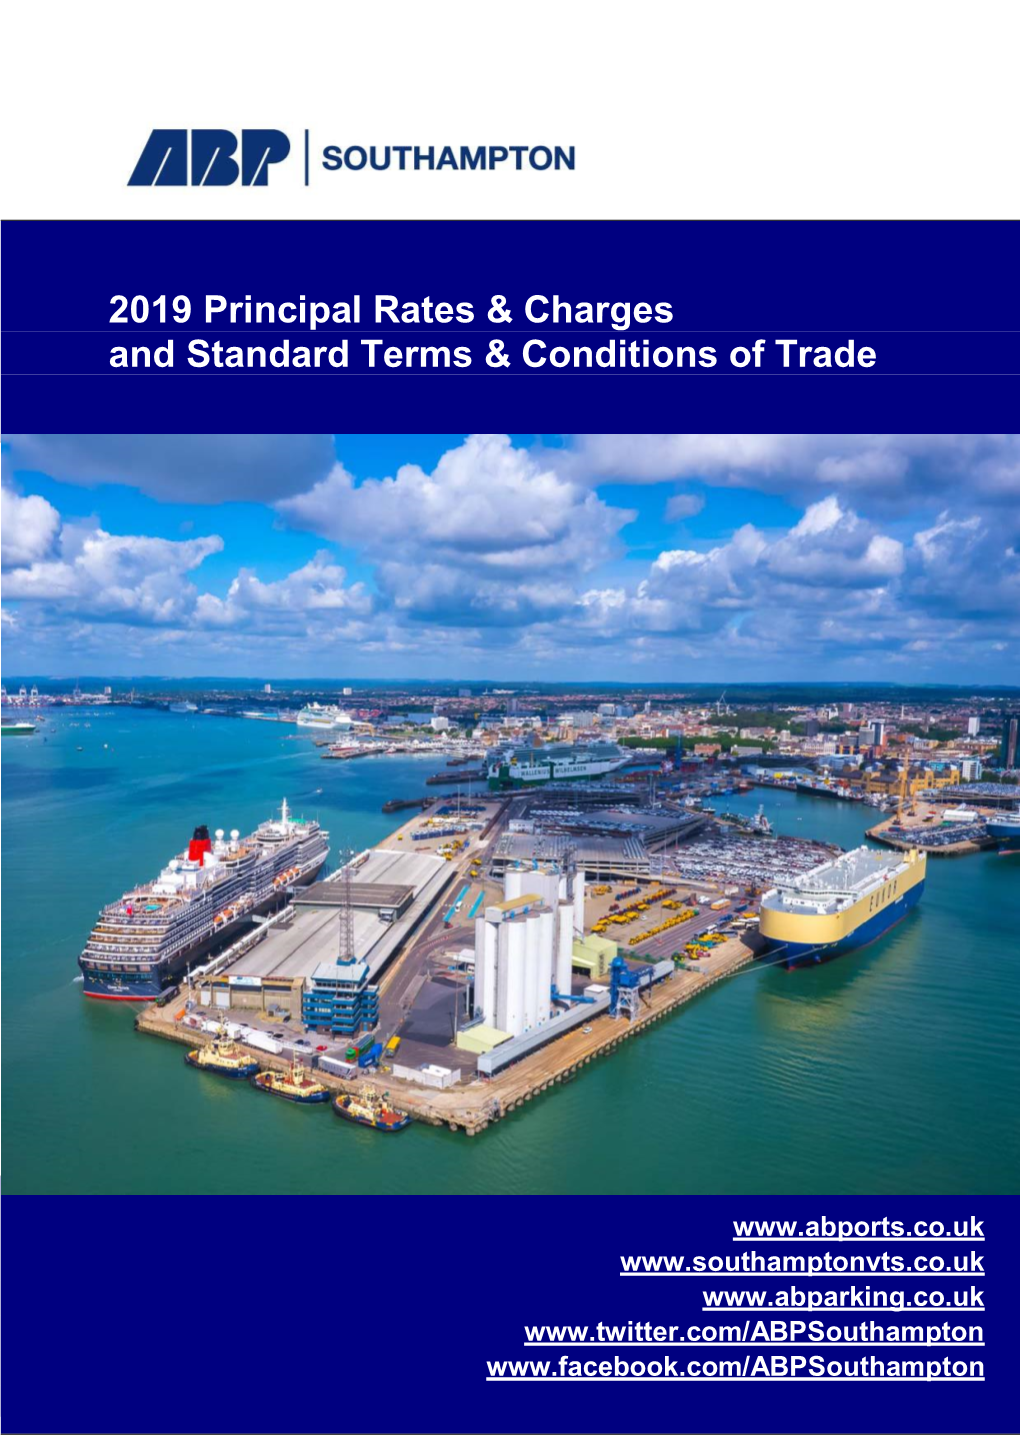 2019 Principal Rates & Charges and Standard Terms & Conditions Of